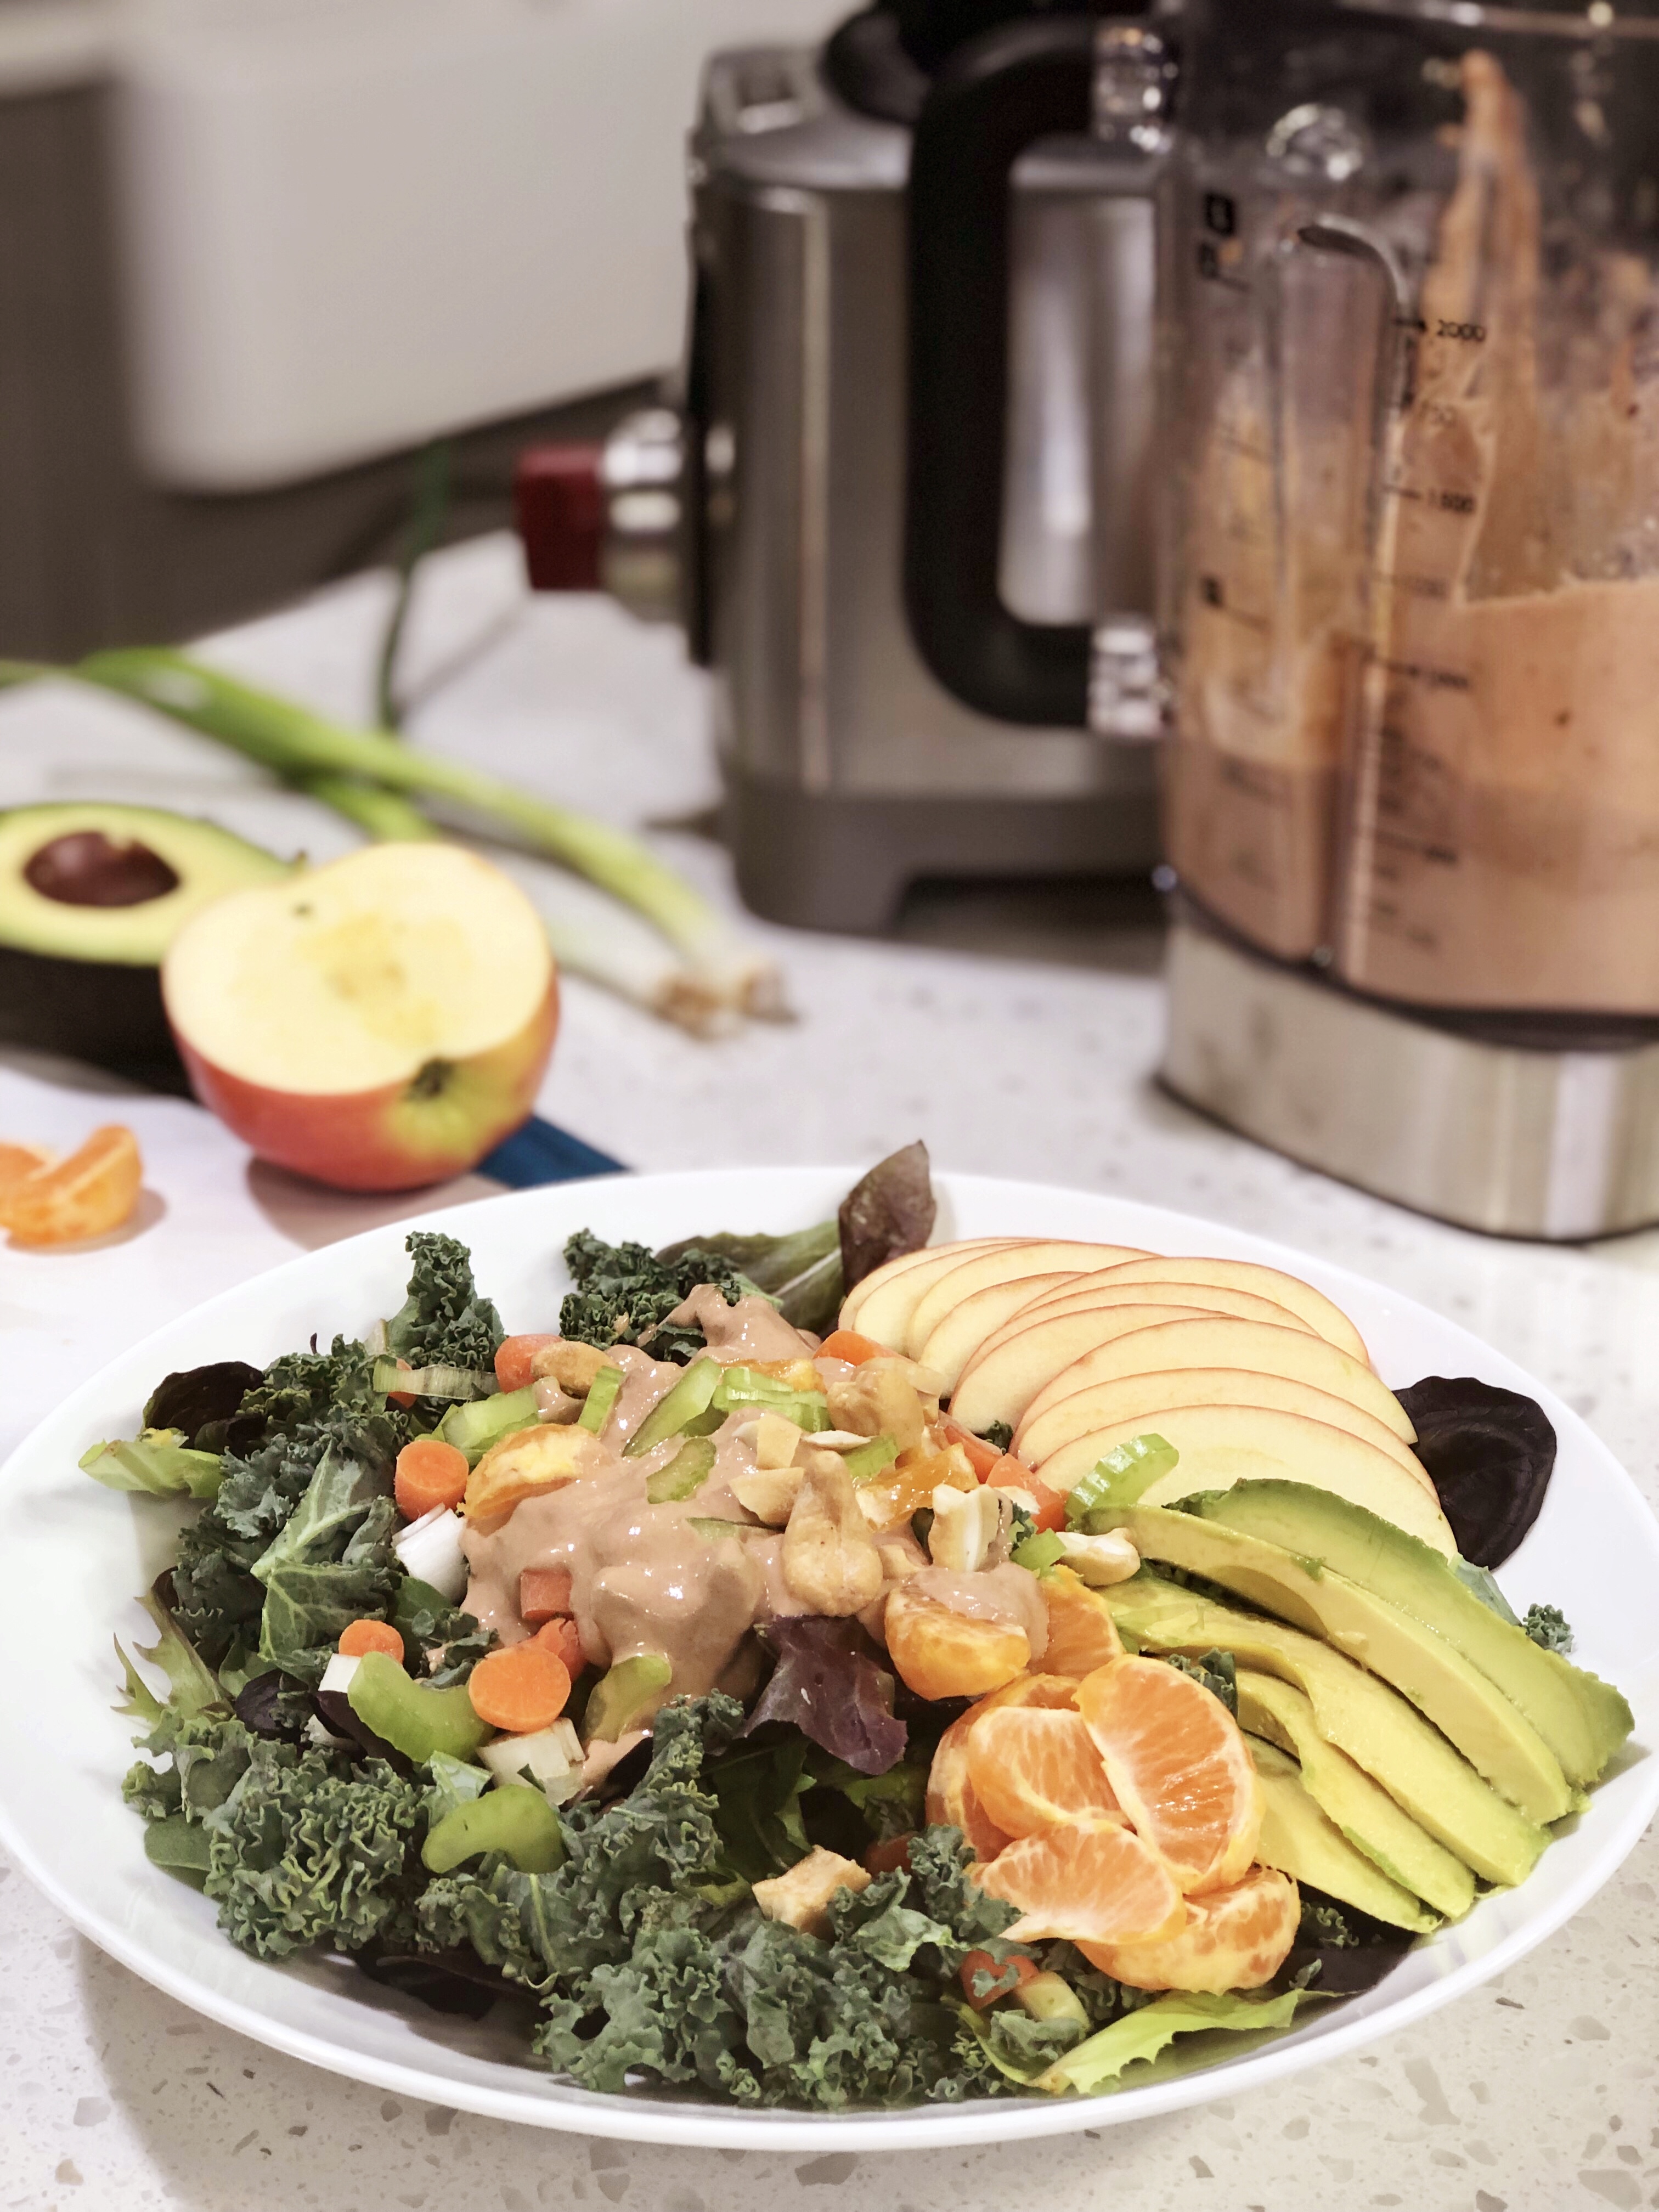 Cashew Salad Dressing - cooking with chef bryan